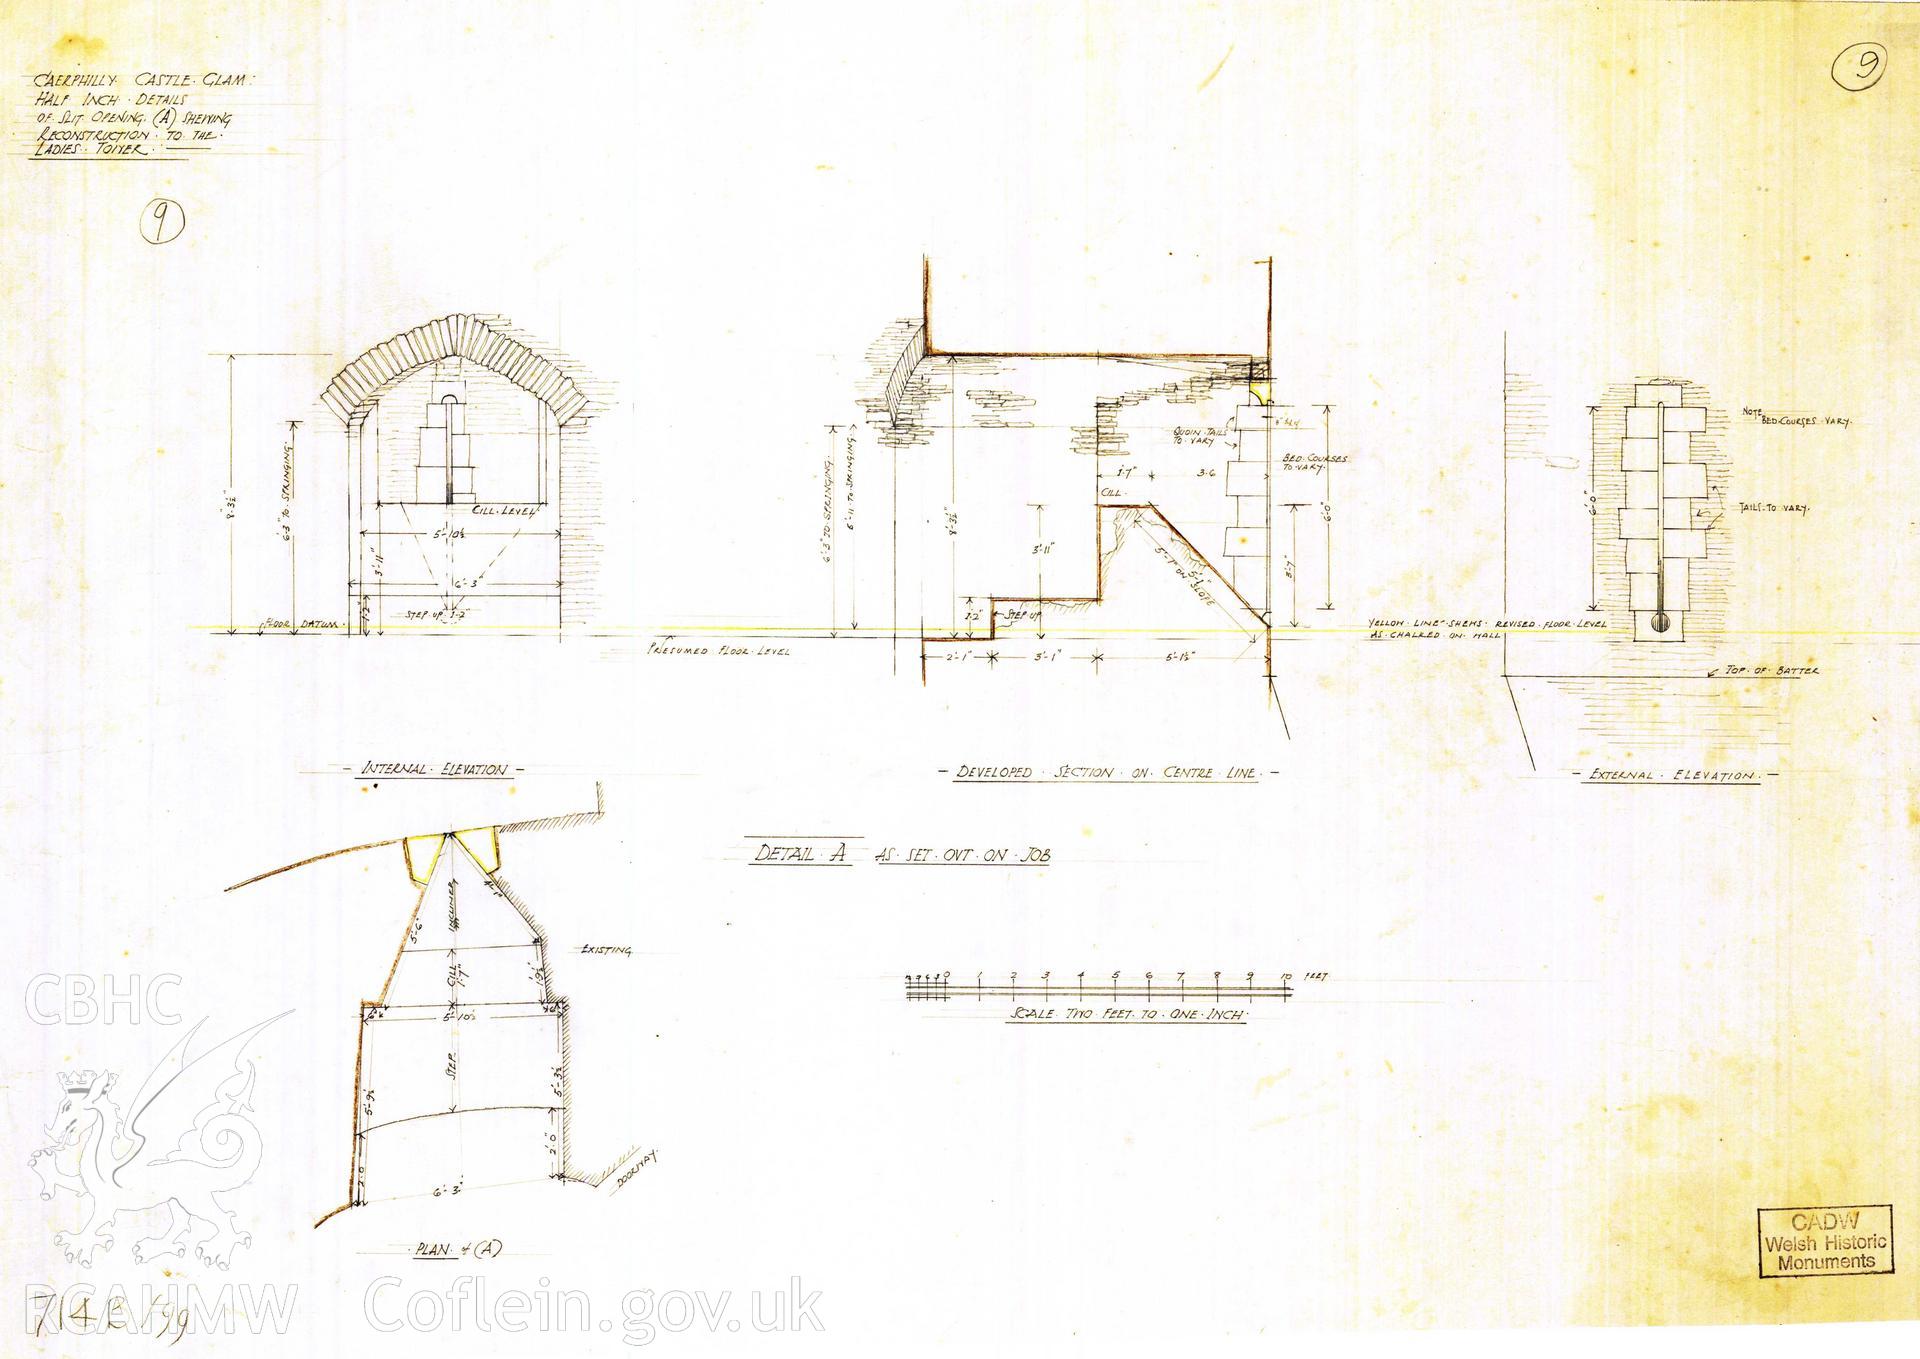 Digital copy of Cadw guardianship monument drawing of Caerphilly Castle. NW tower, arrowslit A. Cadw ref. no: 714B/99. Scale 1:24. Original drawing withdrawn and returned to Cadw at their request.